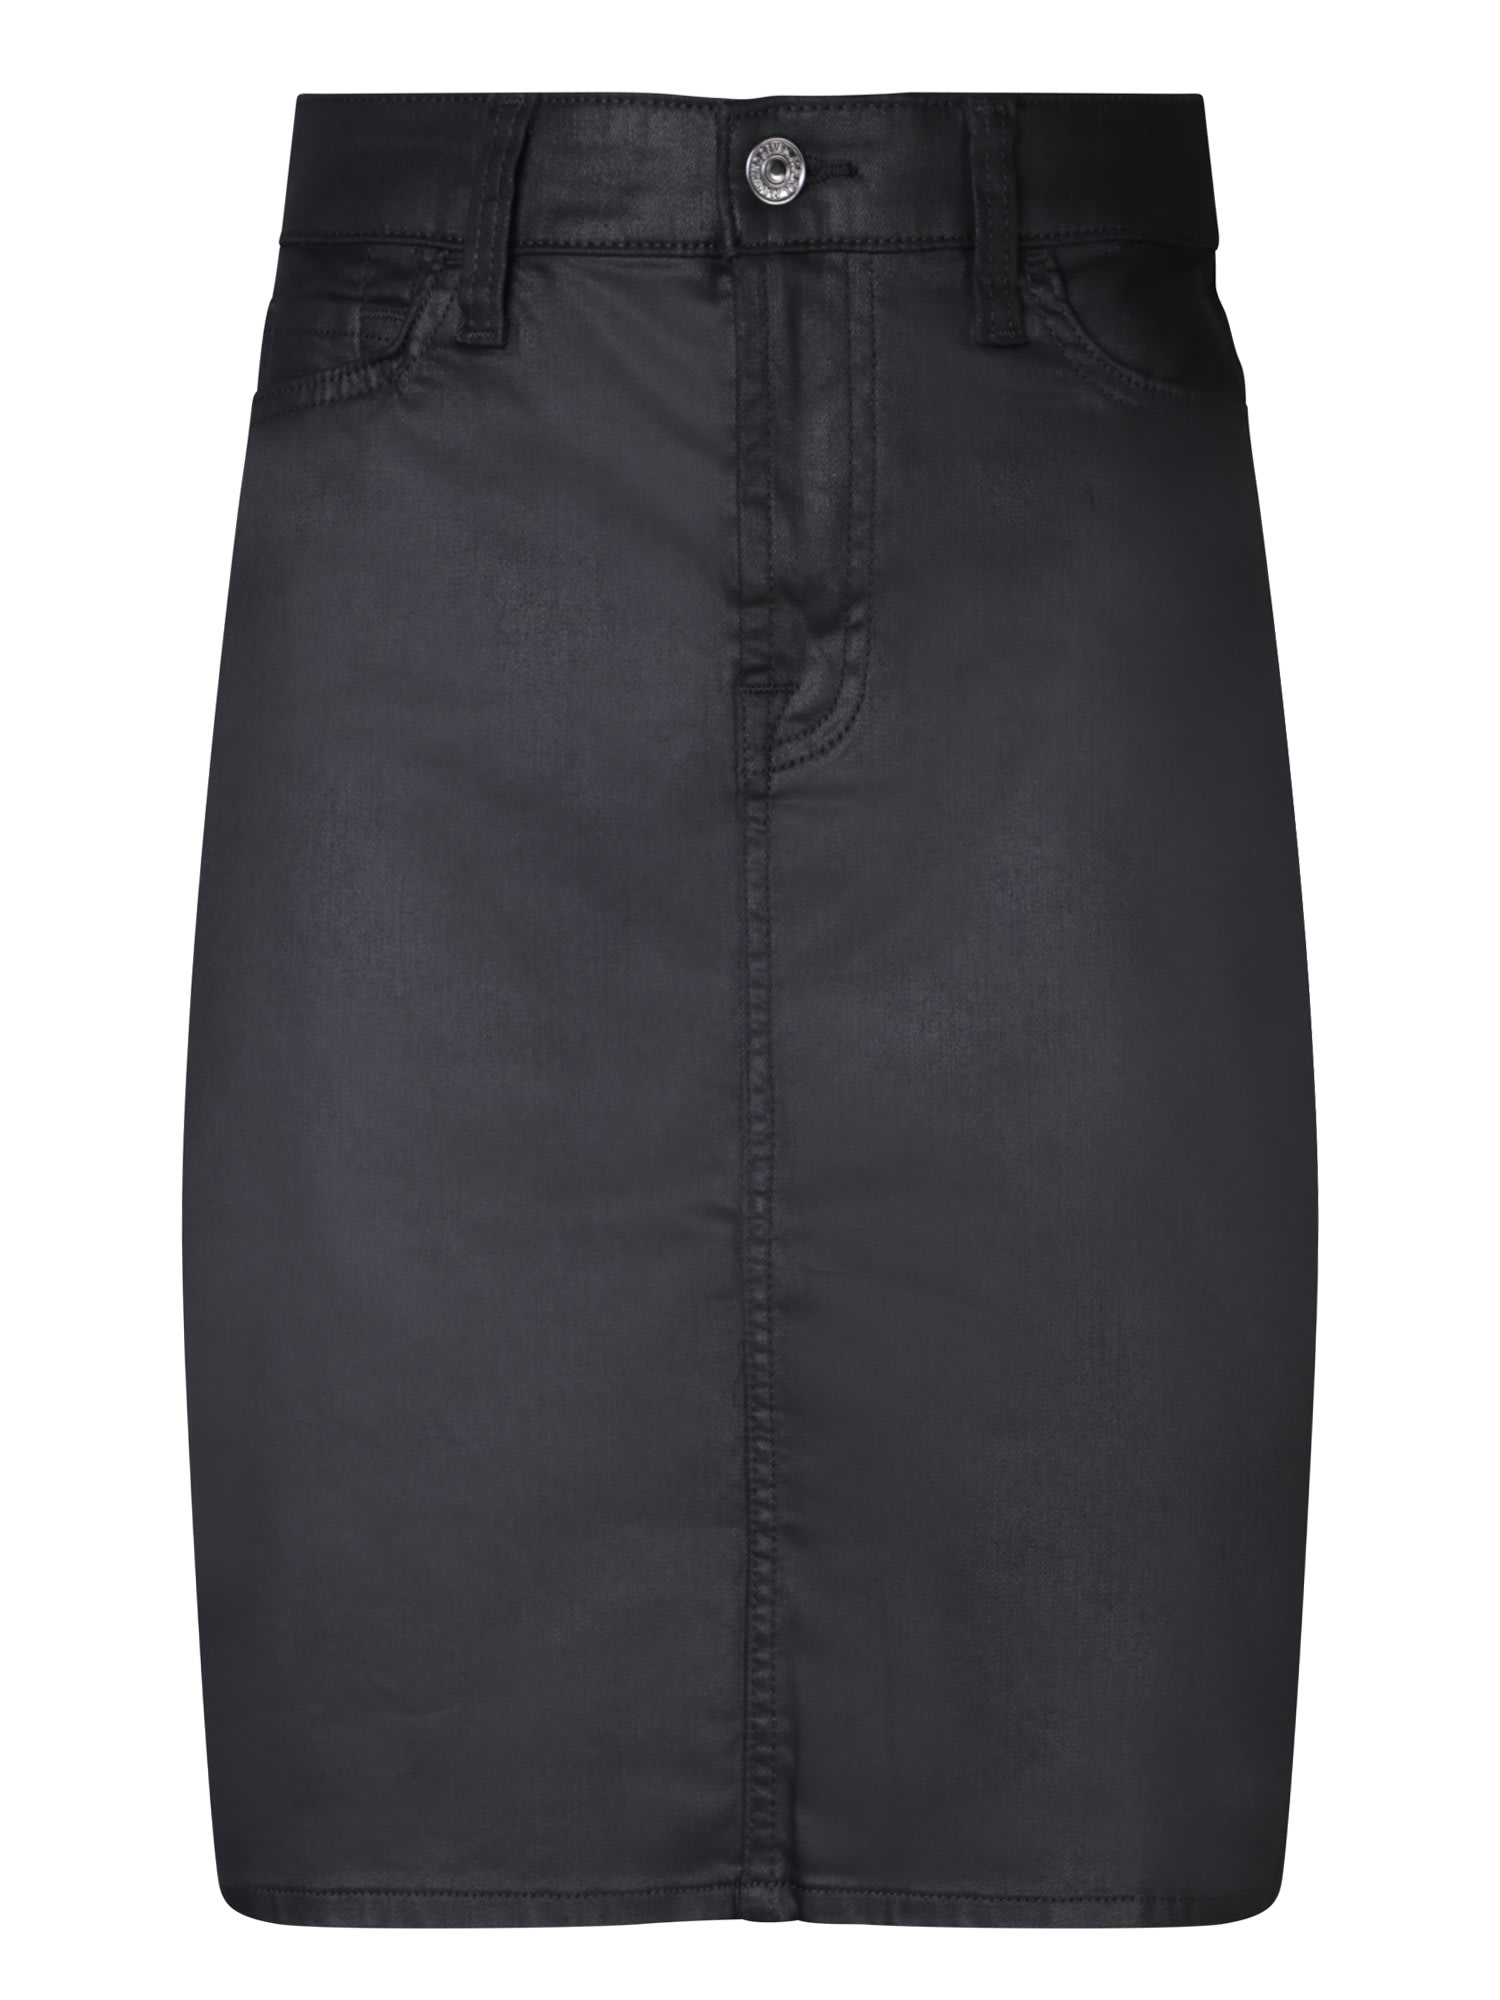 7 FOR ALL MANKIND EASY PENCIL RABBIT HOLE BLACK SKIRT